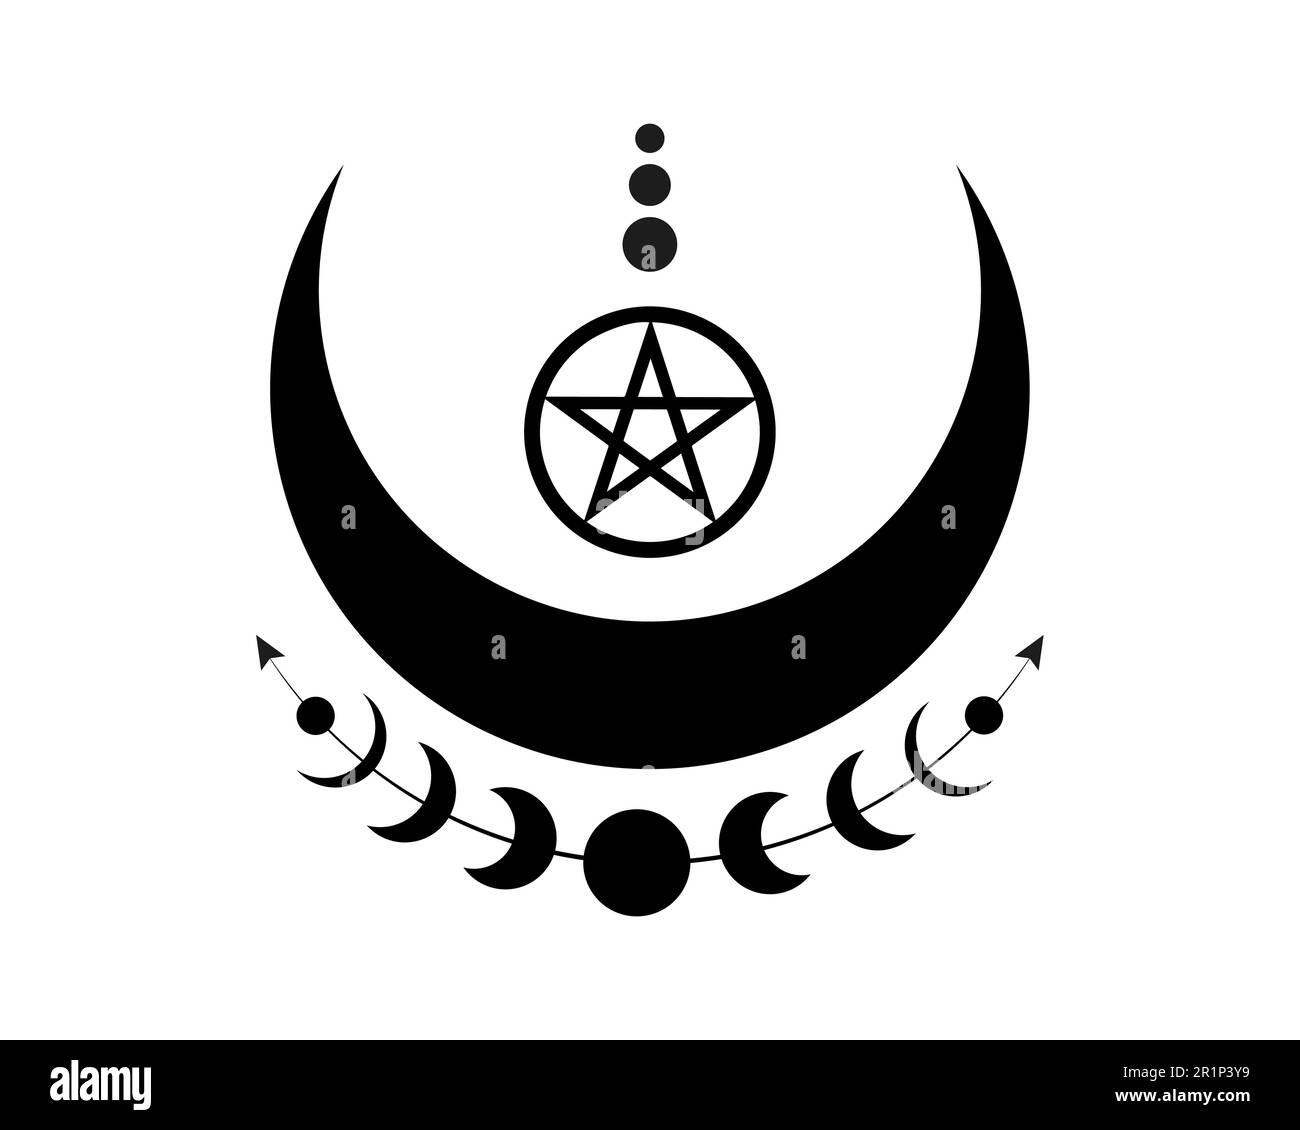 Mystical Moon Phases and Wicca pentacle. Sacred geometry. Logo, crescent moon, half moon pagan Wiccan goddess symbol, energy circle, boho style vector Stock Vector